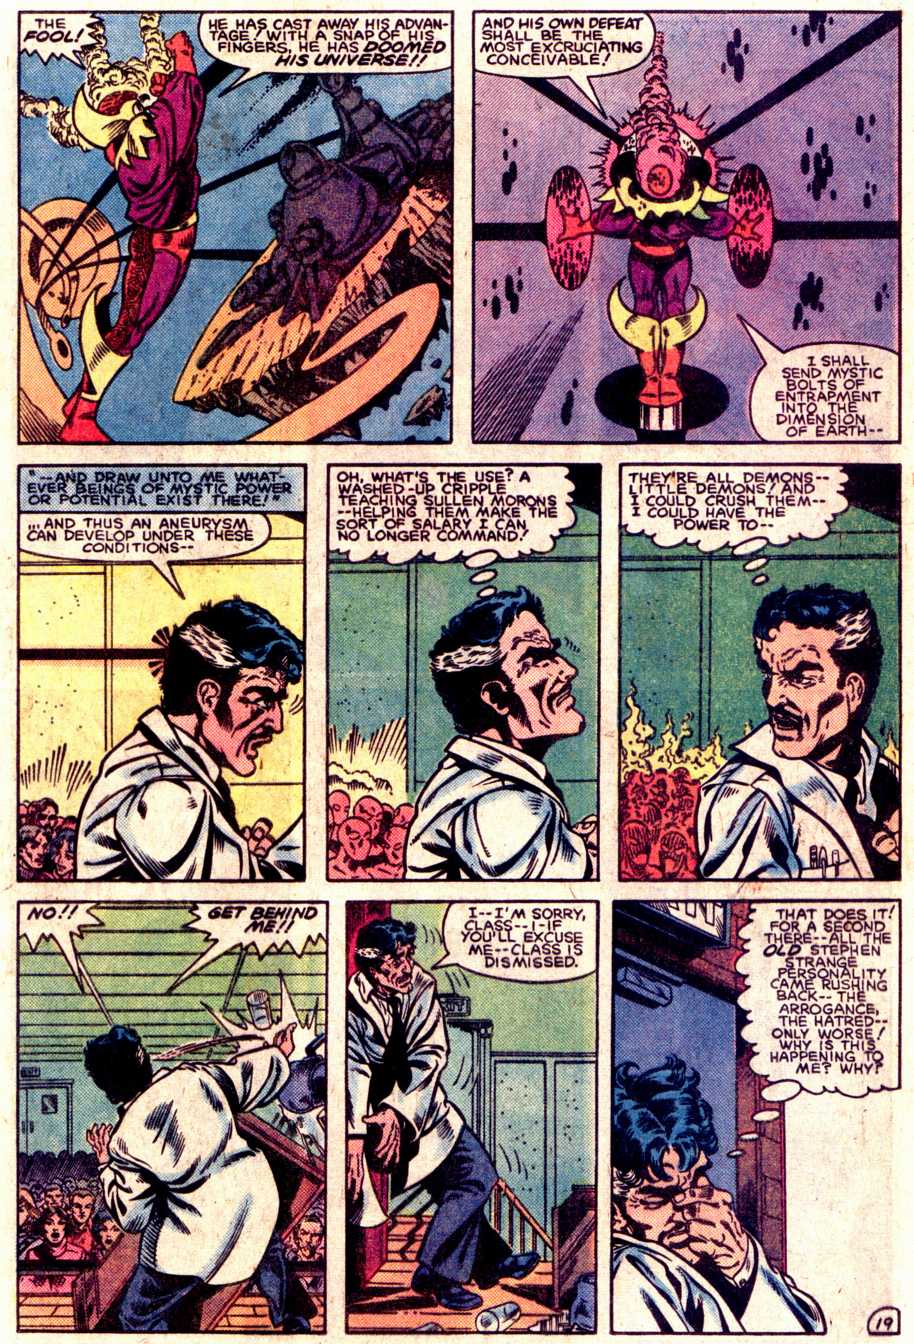 What If? (1977) issue 40 - Dr Strange had not become master of The mystic arts - Page 20